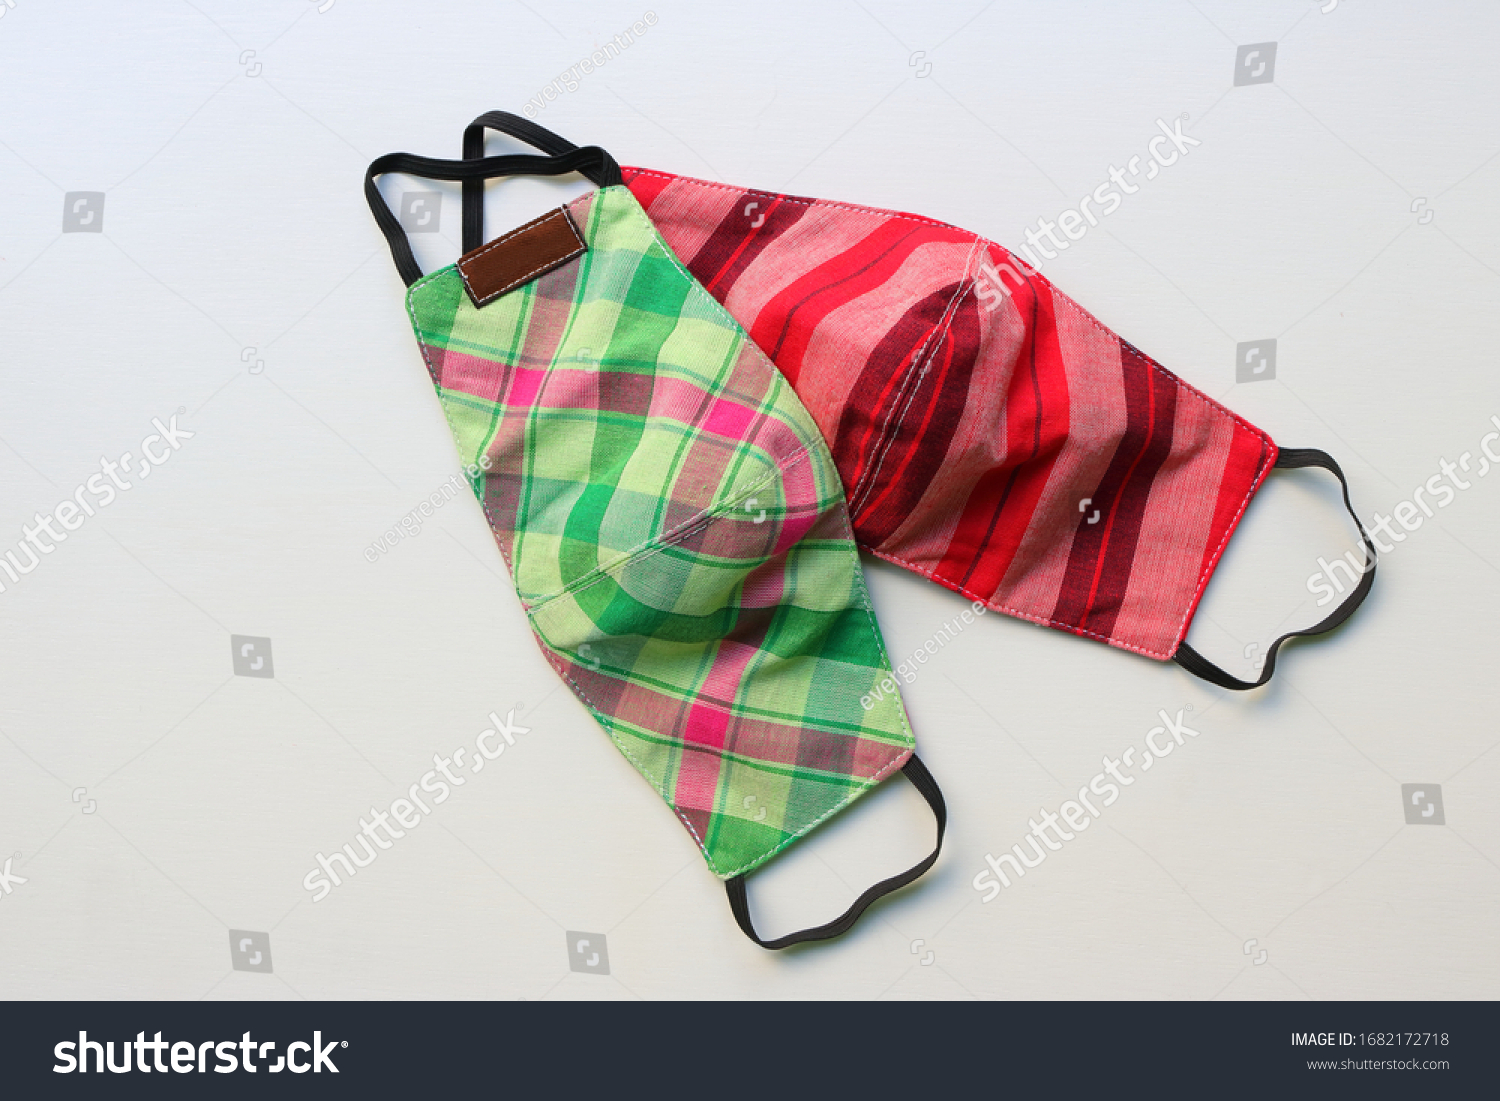 Two handmade face masks made from plaid cloth placed on wooden table, washable and reusable, can be used during shortage of surgical mask due to coronavirus pandemic  